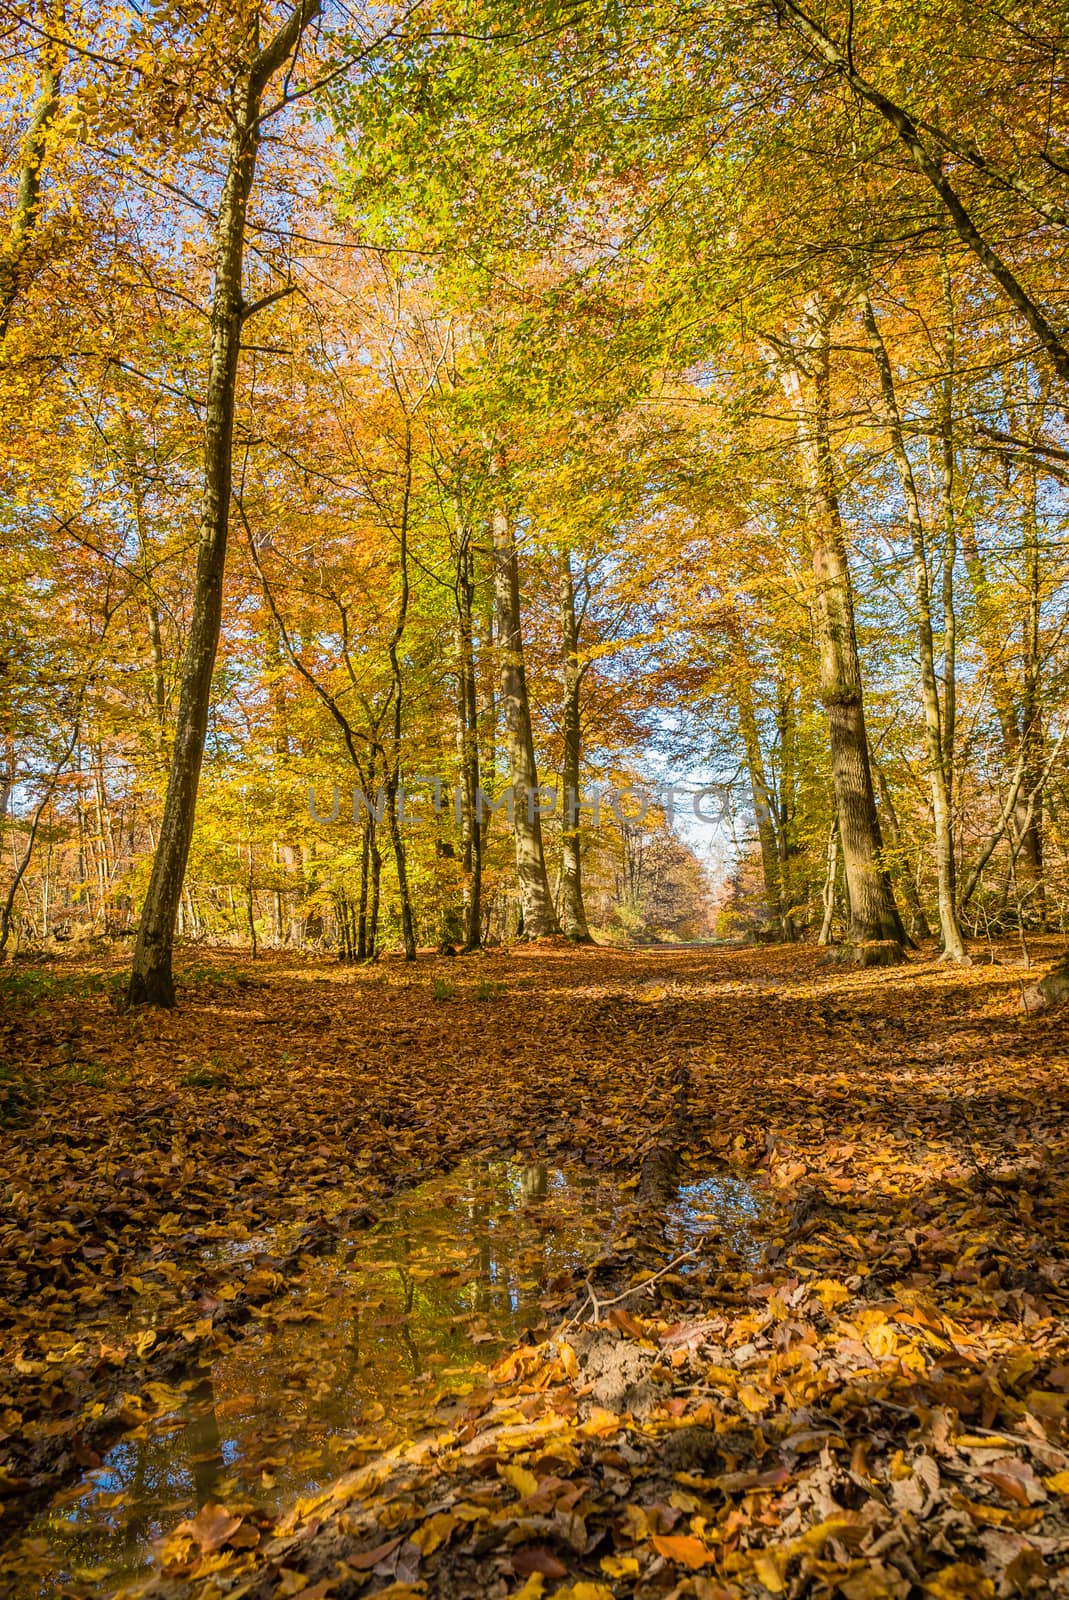 Autumn walk in the Fontainebleau forest in France